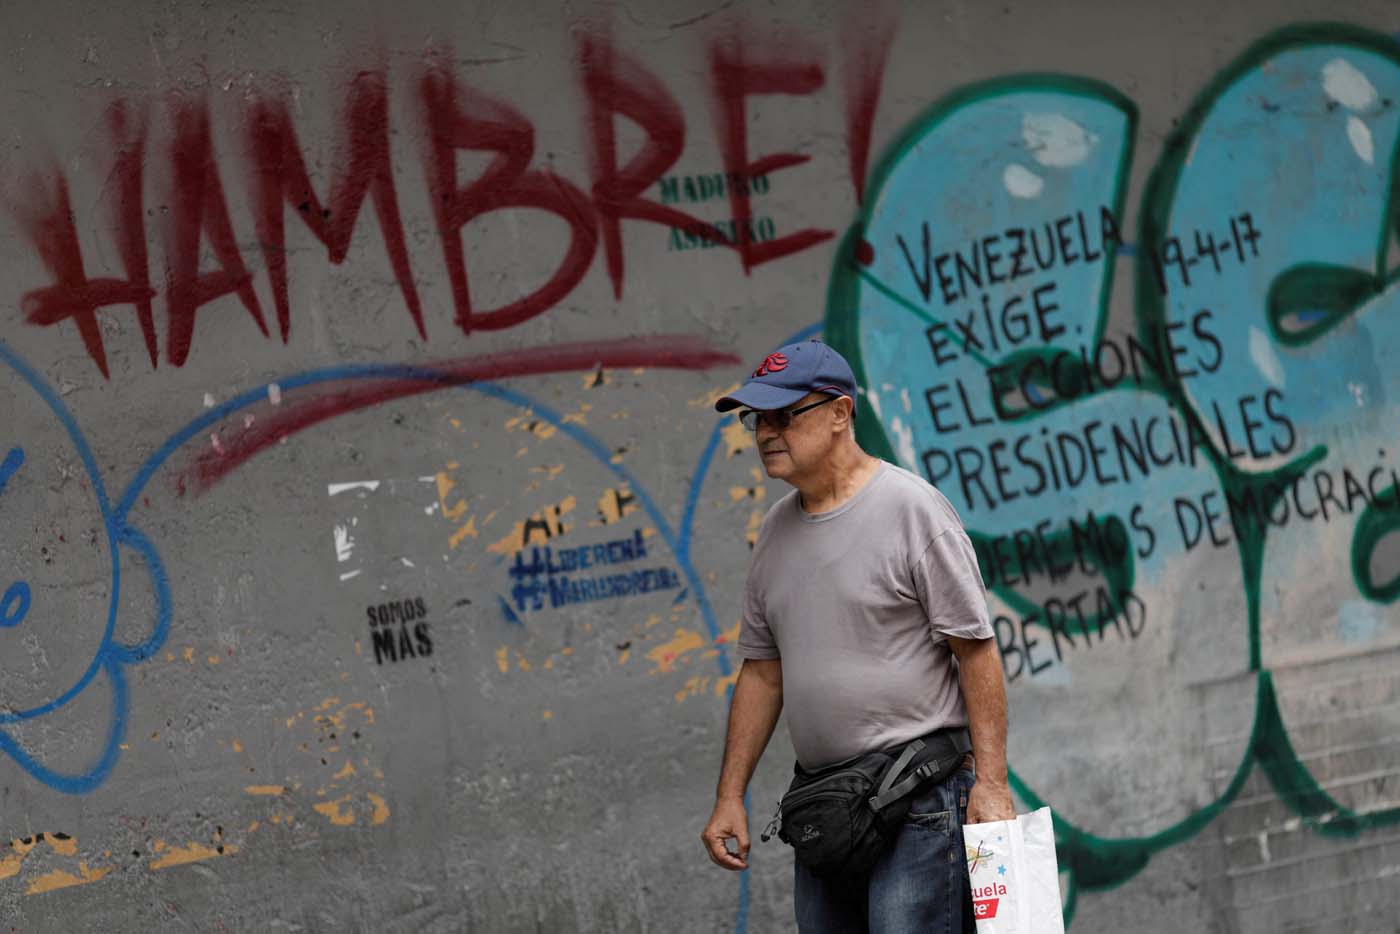 A man walks past of a wall with graffiti that reads "hungry", in Caracas, Venezuela August 3, 2017. REUTERS/Ueslei Marcelino